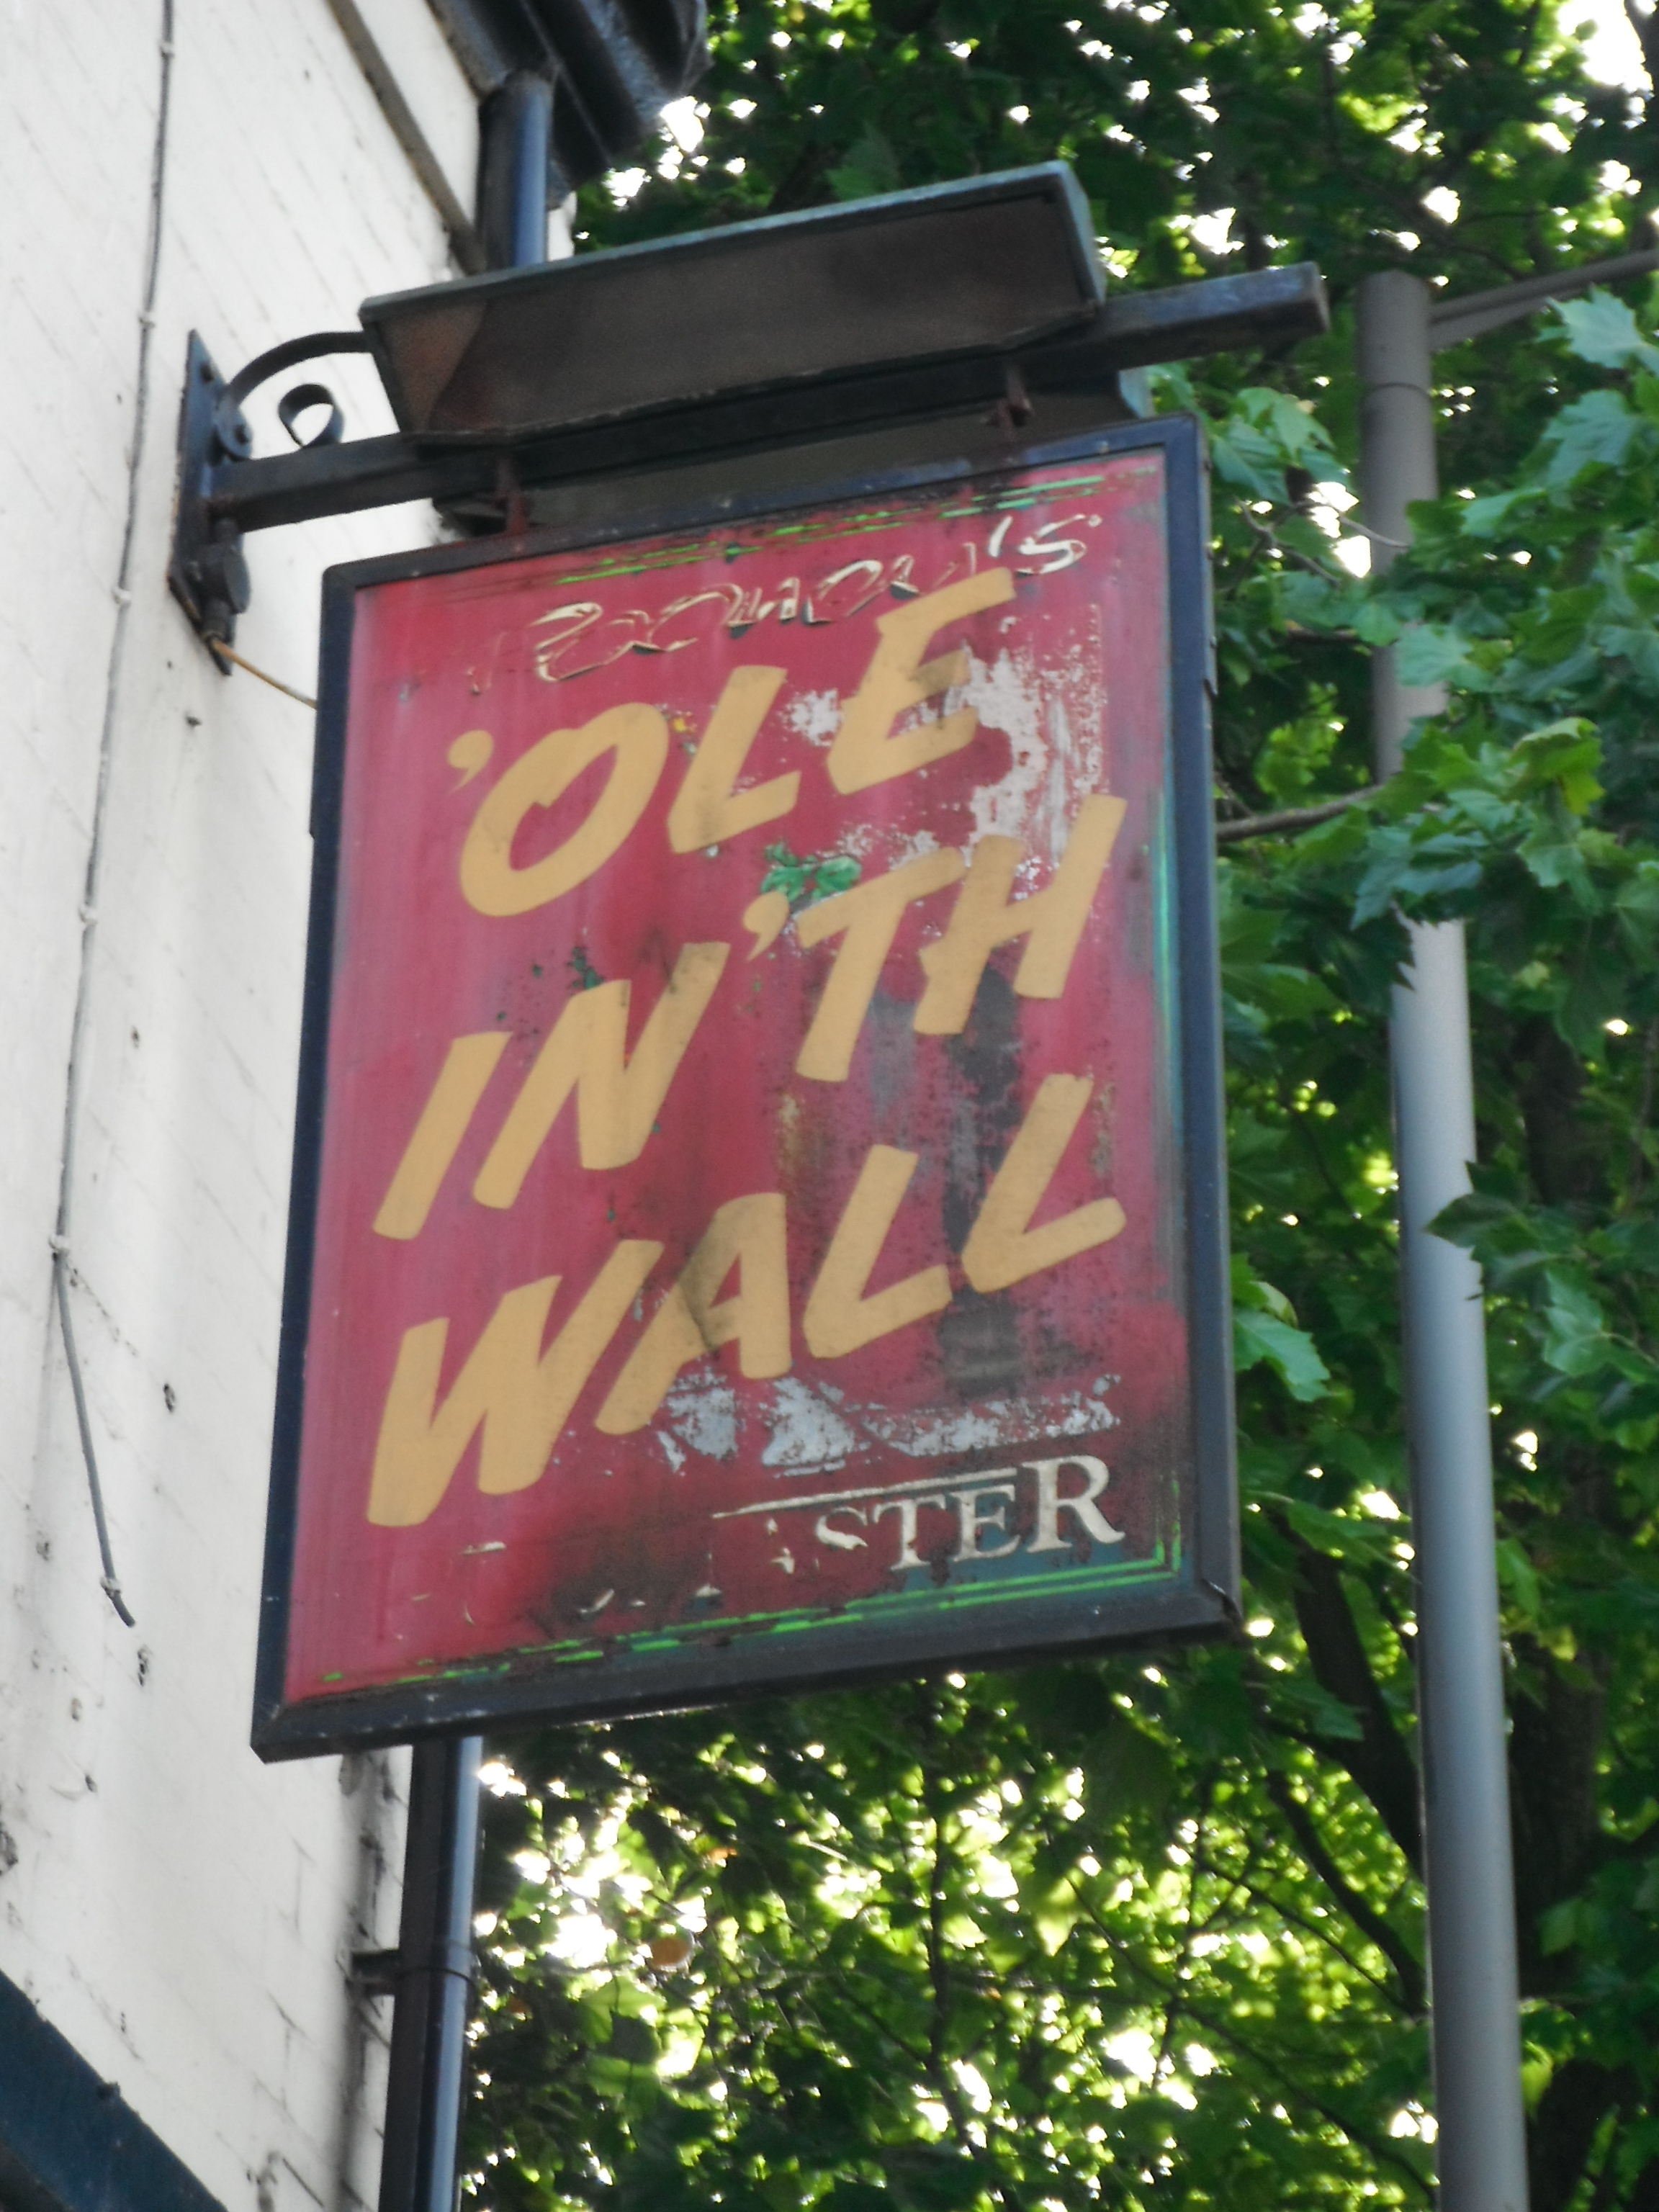 Photo taken by me – The ‘Ole In The Wall pub sign, Preston